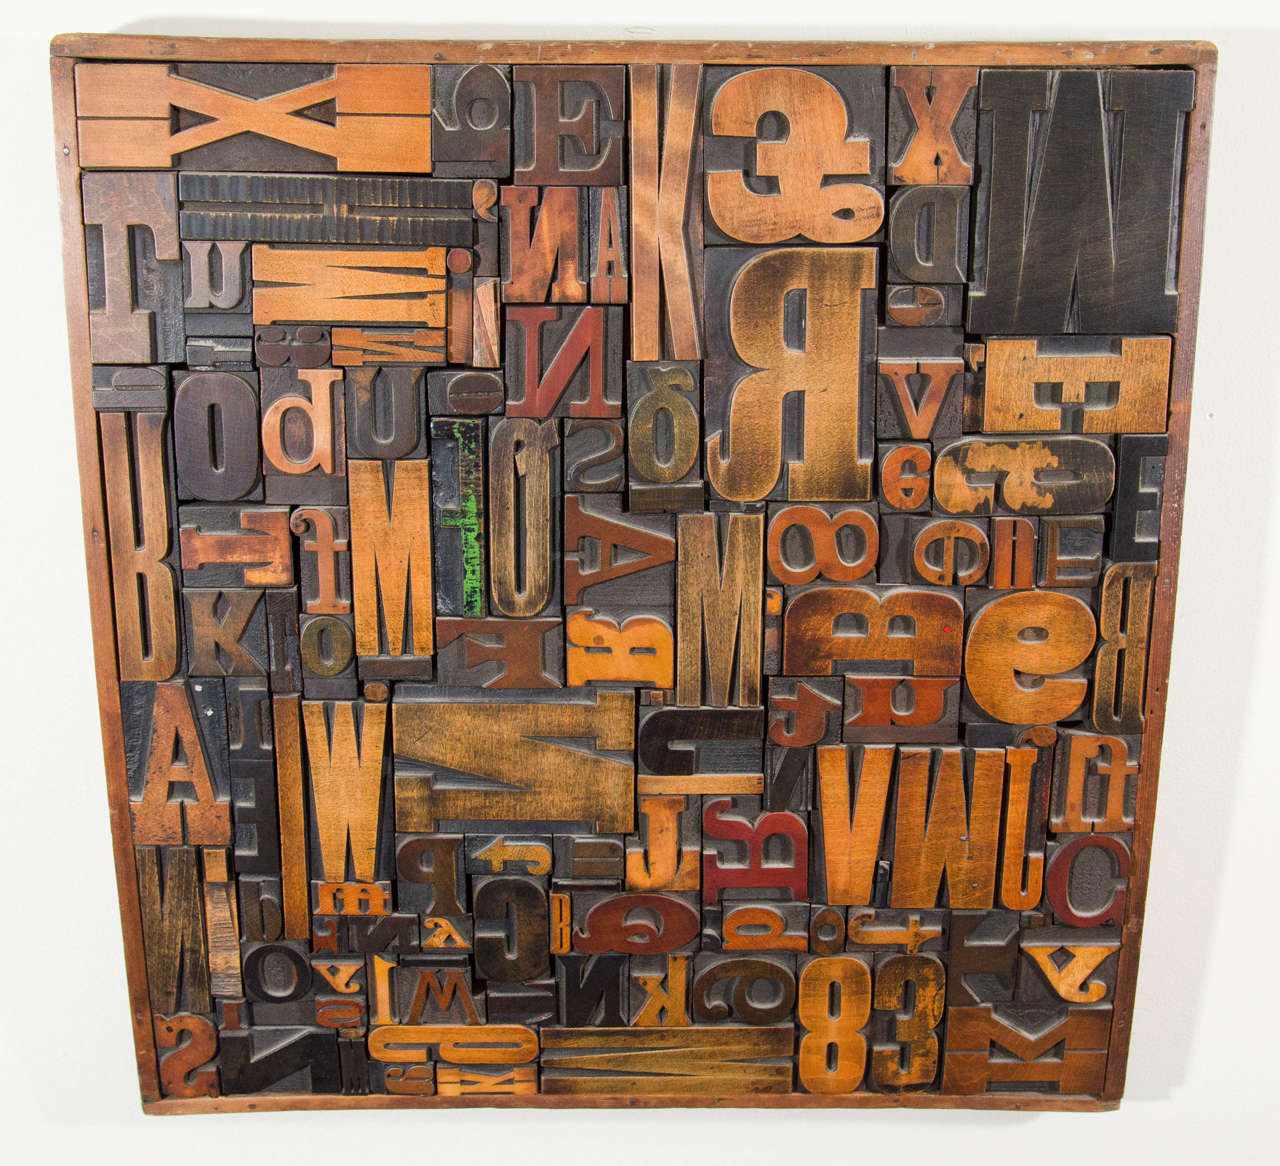 A vintage letterpress printers blocks wall sculpture with a variety of letters and numbers in a wooden frame.  Good vintage condition with age appropriate wear.  One letter is green.  There is a second letterpress printers blocks wall sculpture